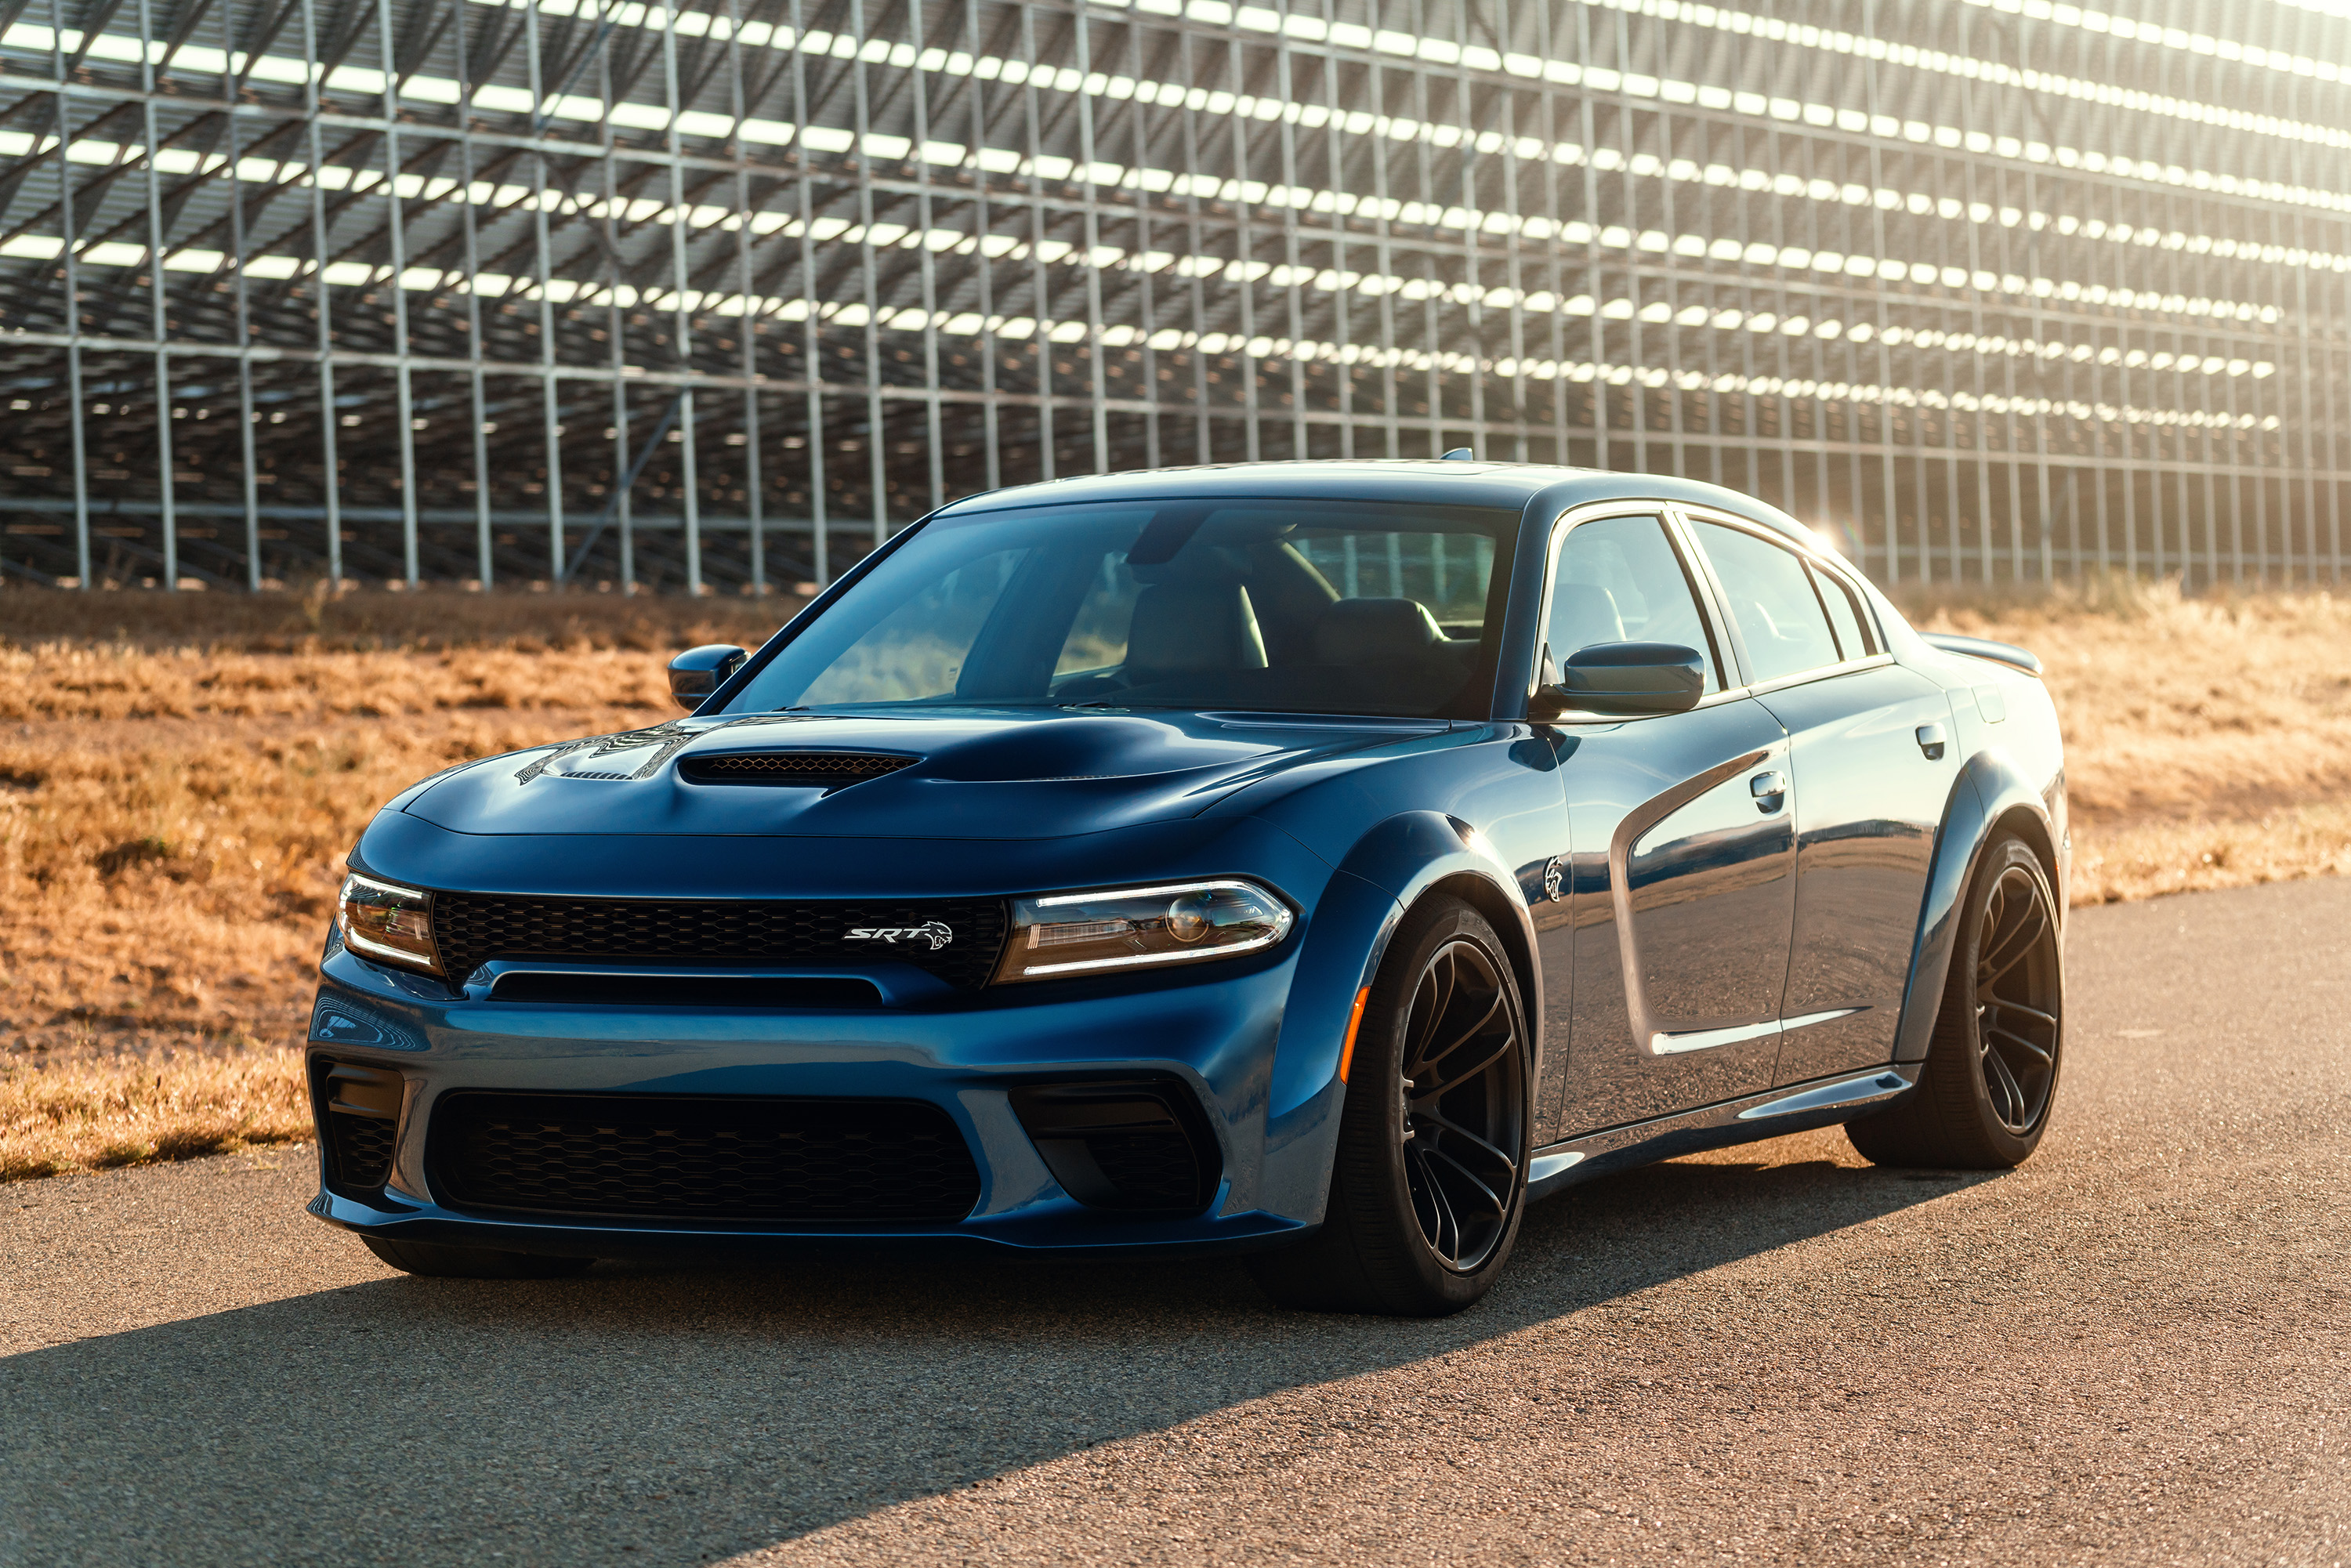 Download Dodge Charger Srt Hellcat wallpapers for mobile phone free Dodge  Charger Srt Hellcat HD pictures